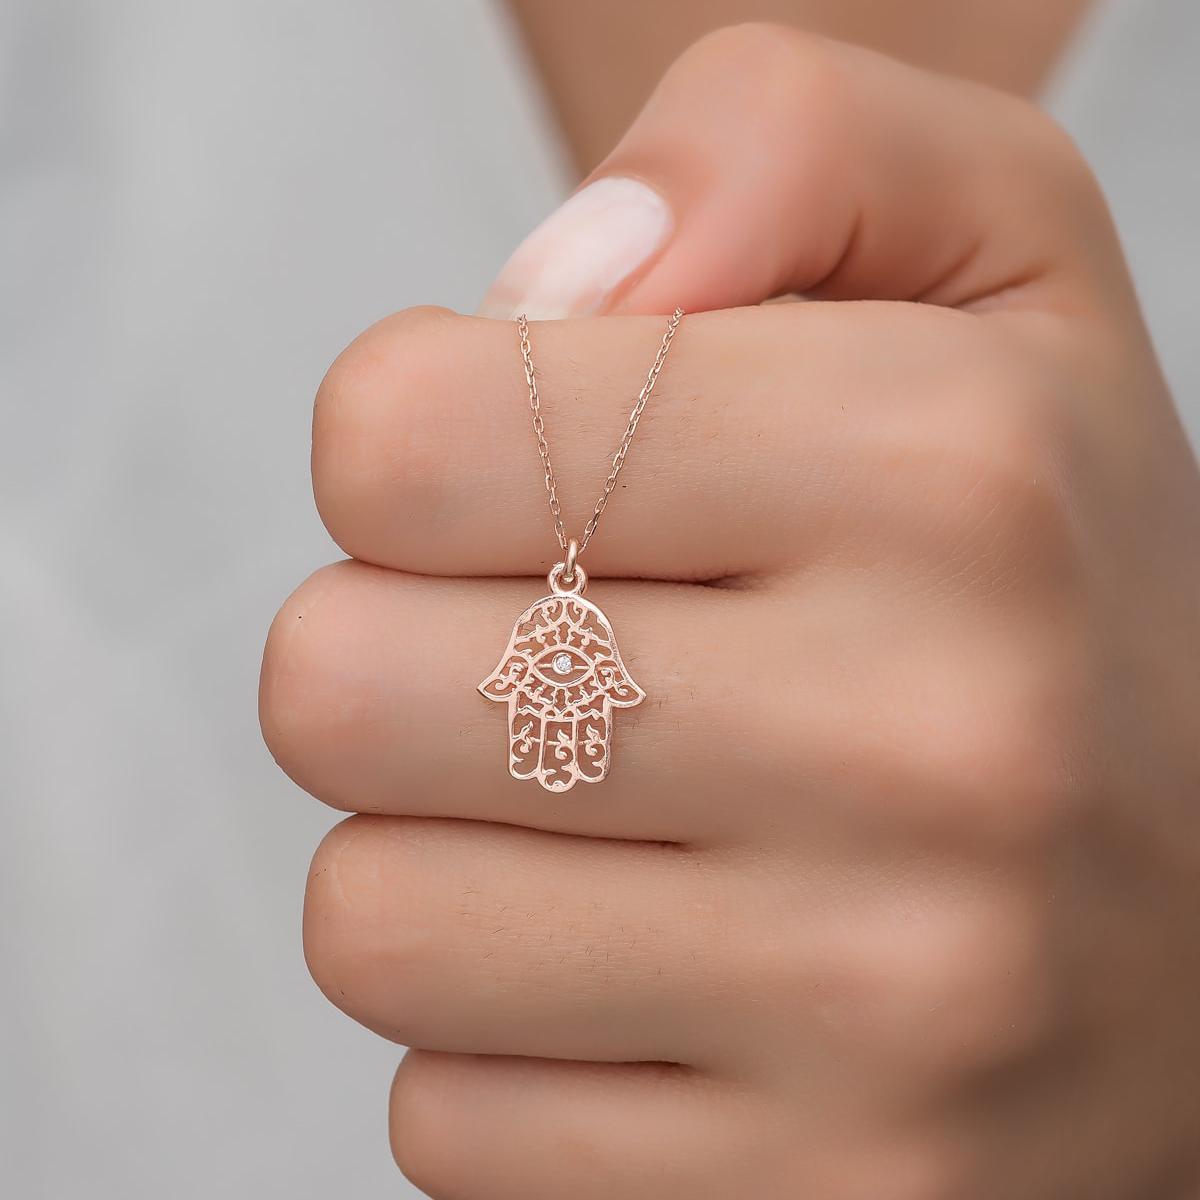 Hamsa Jewish Necklace • Evil Eye Protection Necklace • Gift For Her - Trending Silver Gifts